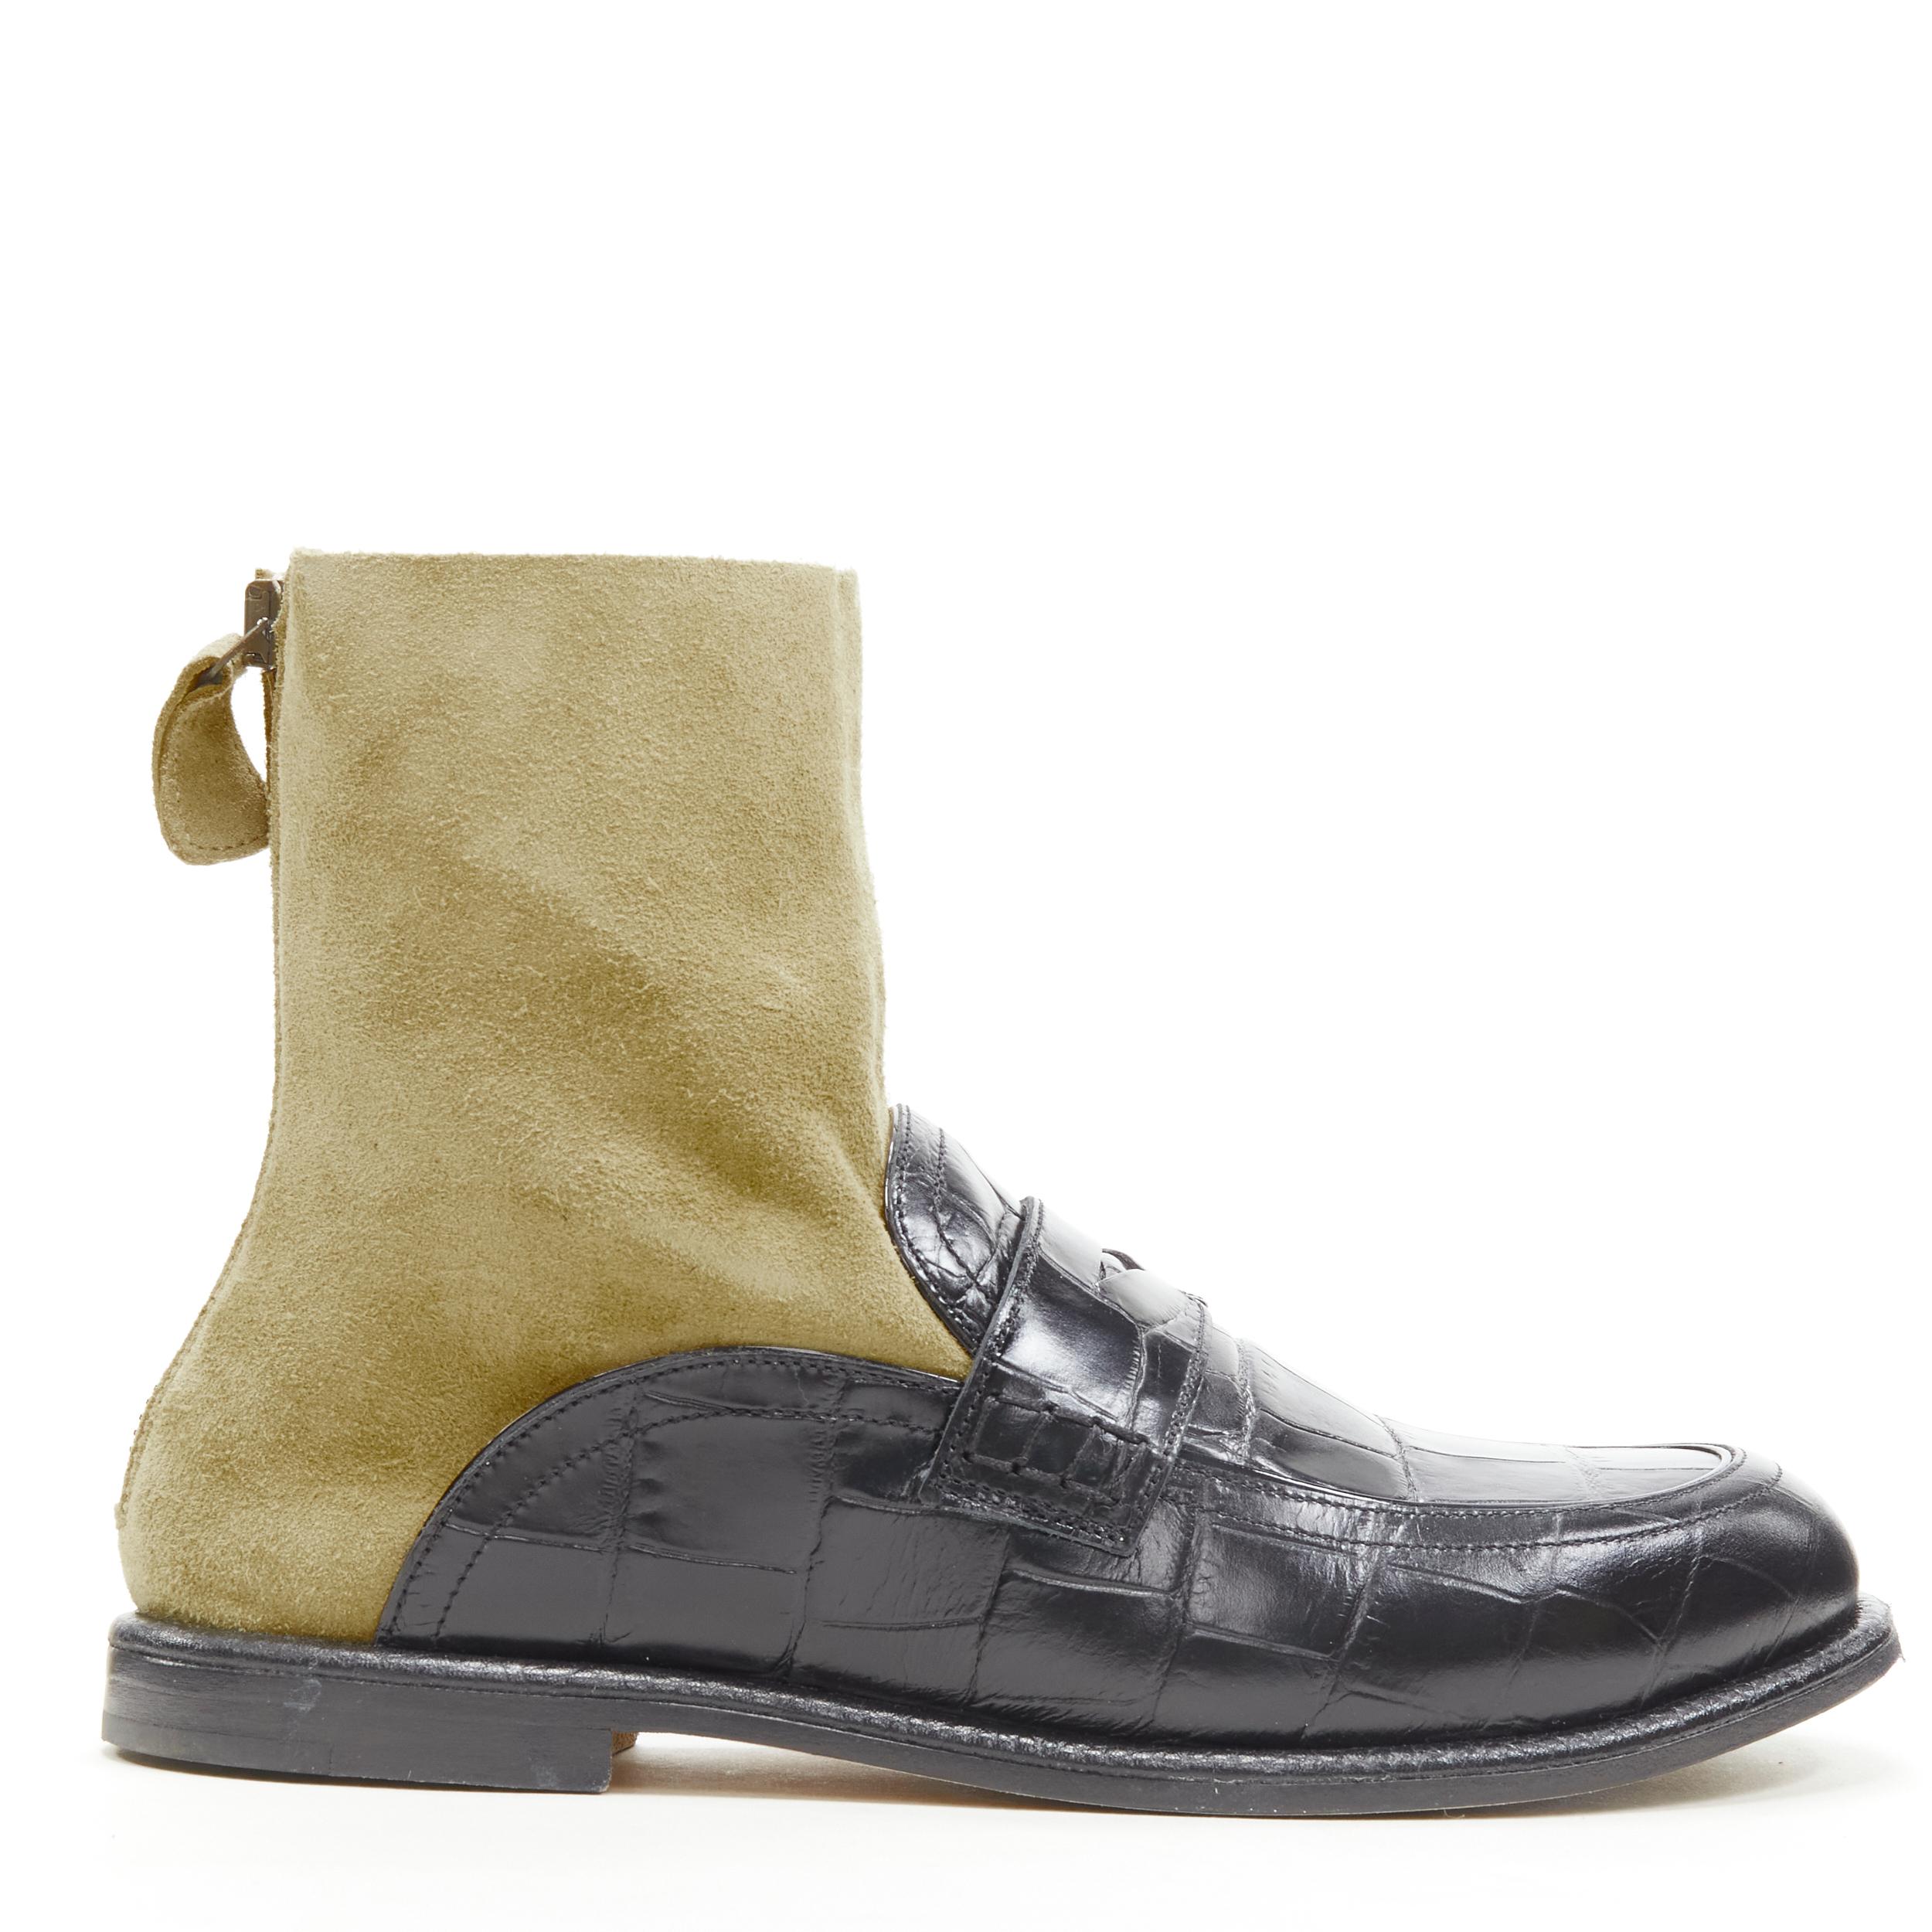 LOEWE black black croc embossed leather brown suede sock loafer boot EU36 
Reference: ANWU/A00373 
Brand: Loewe 
Designer: JW Anderson 
Material: Leather 
Color: Black 
Pattern: Solid 
Closure: Zip 
Extra Detail: Zip back closure. 
Made in: Italy